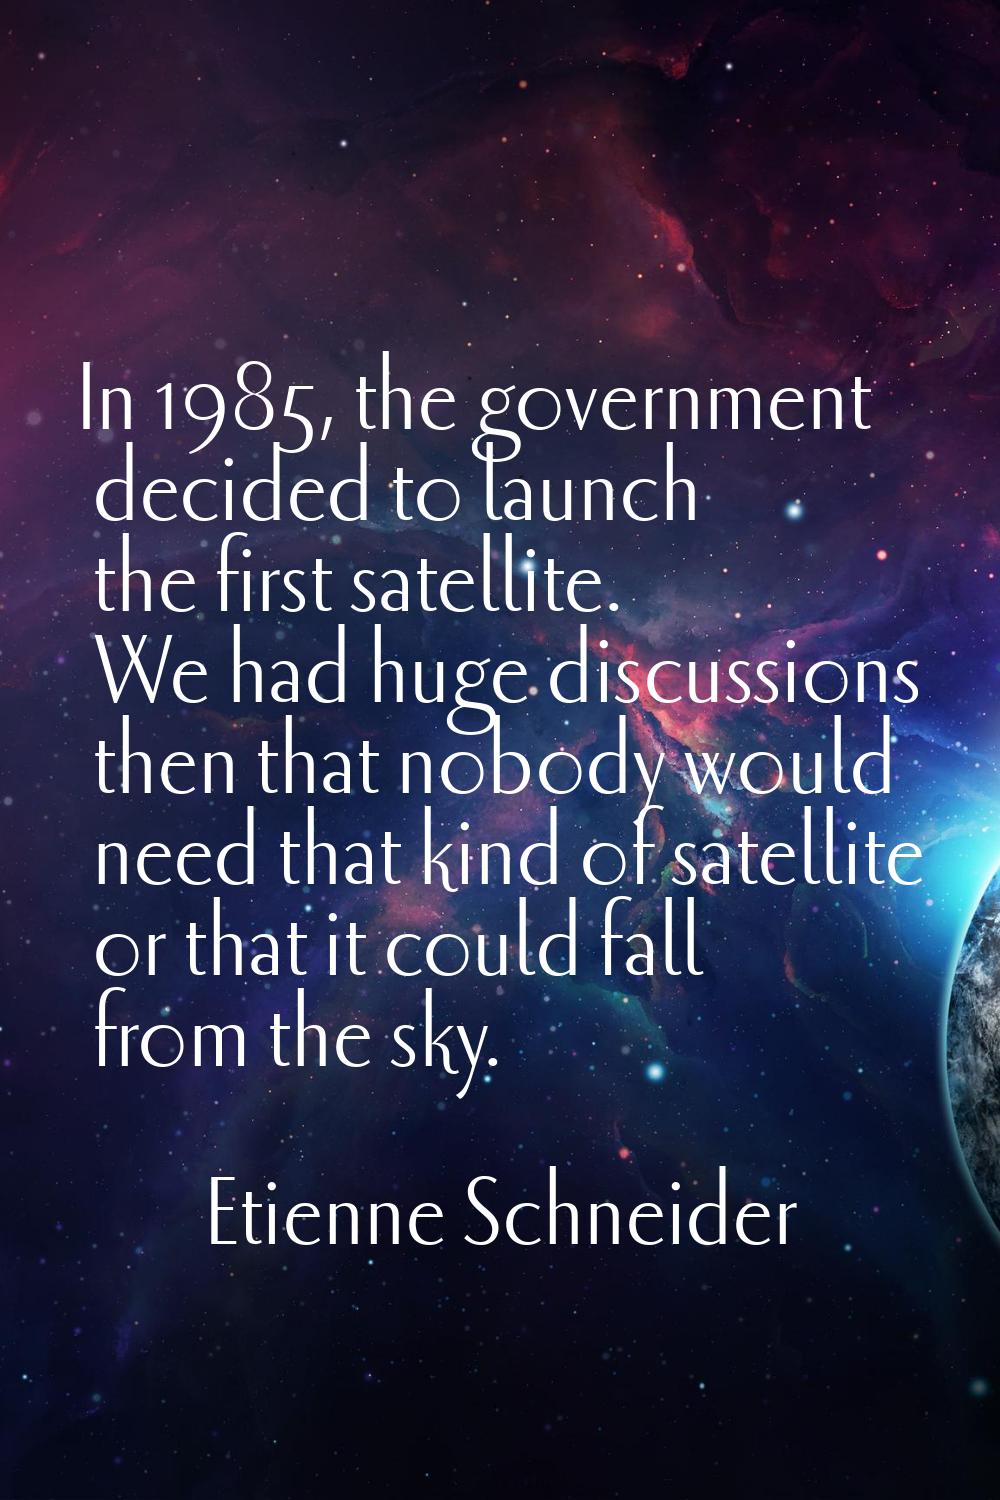 In 1985, the government decided to launch the first satellite. We had huge discussions then that no